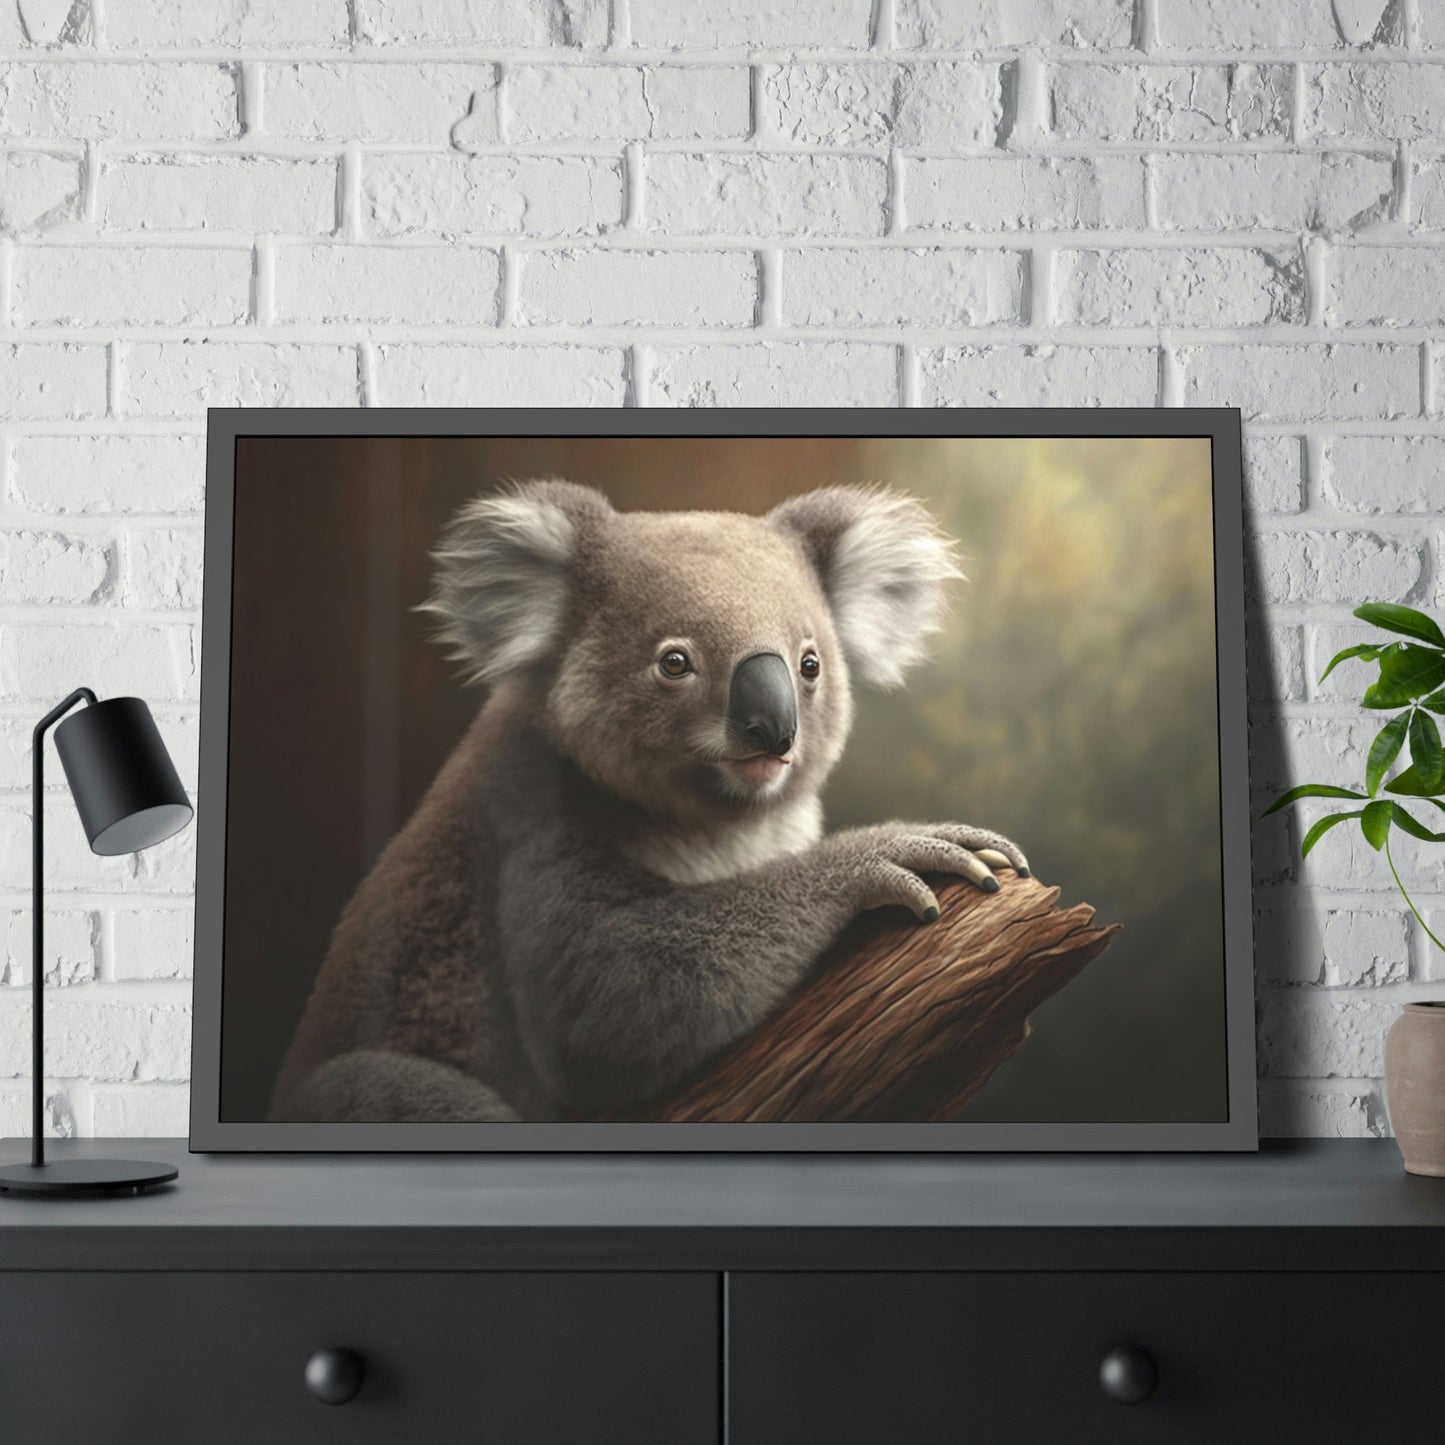 Koala Magic: An Enigmatic Painting on Canvas